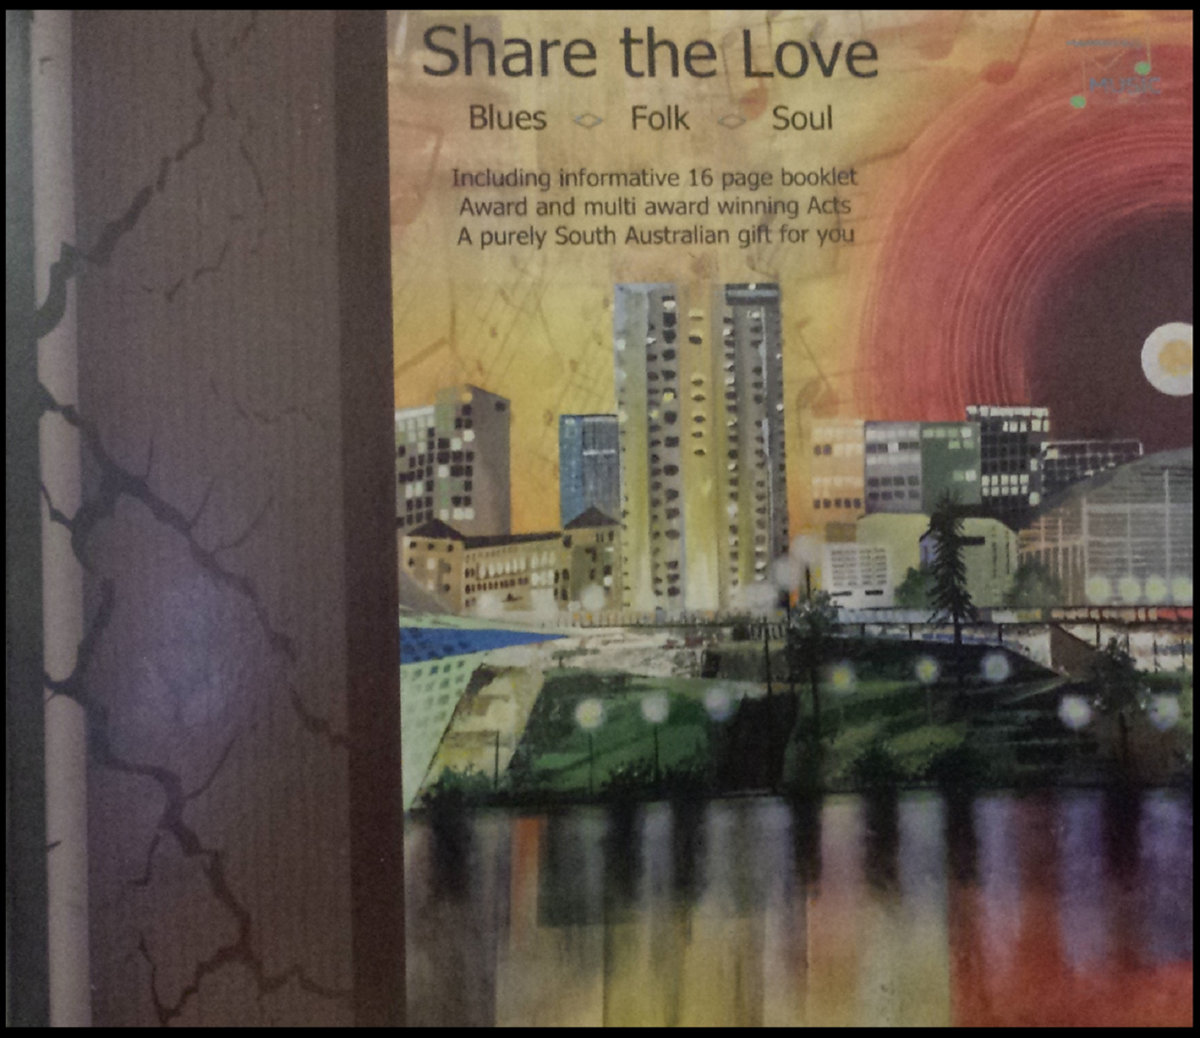 Share the Love | Share The Love